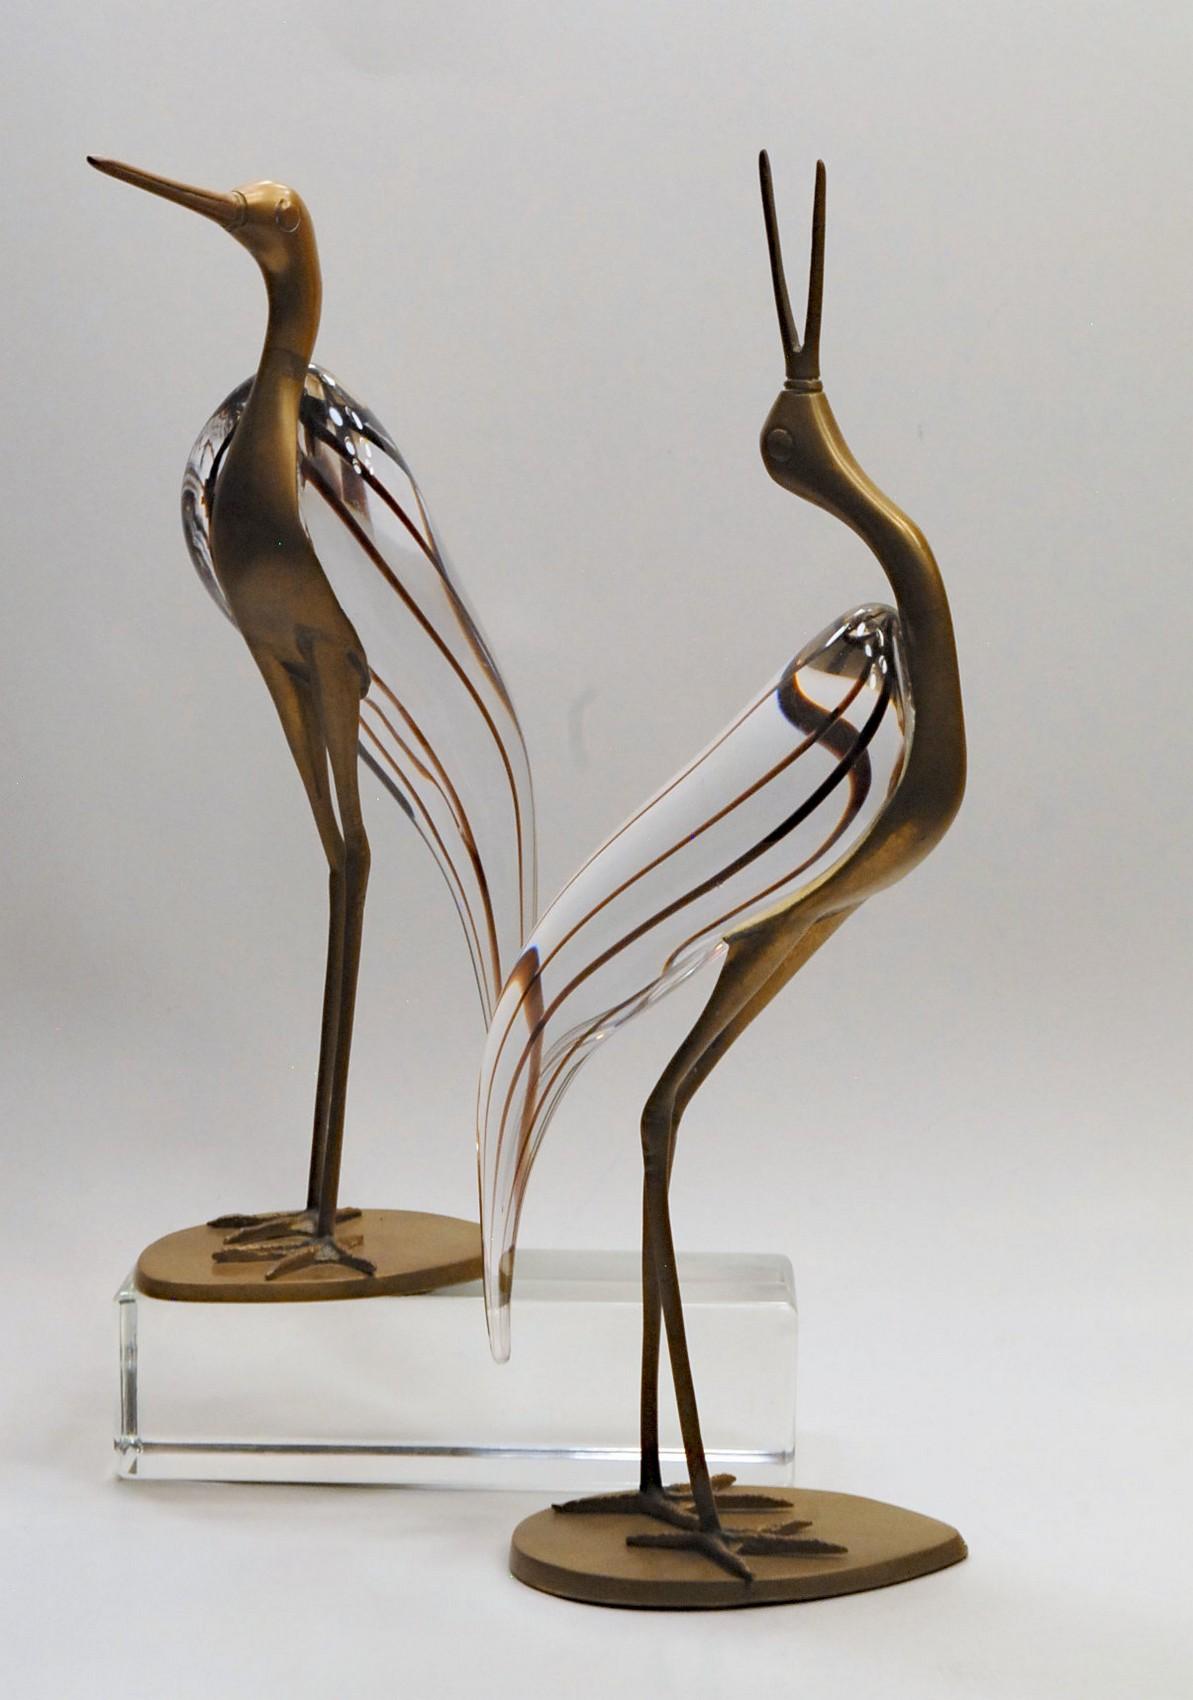 Beautiful rare and elegant pair of brass and glass herons (or egrets) from Luca Bojola.

These are from the 1980s when Luca Bojola started his designer career. At the time he was selling to Chapman Furniture and I was working for Sarreid Ltd.